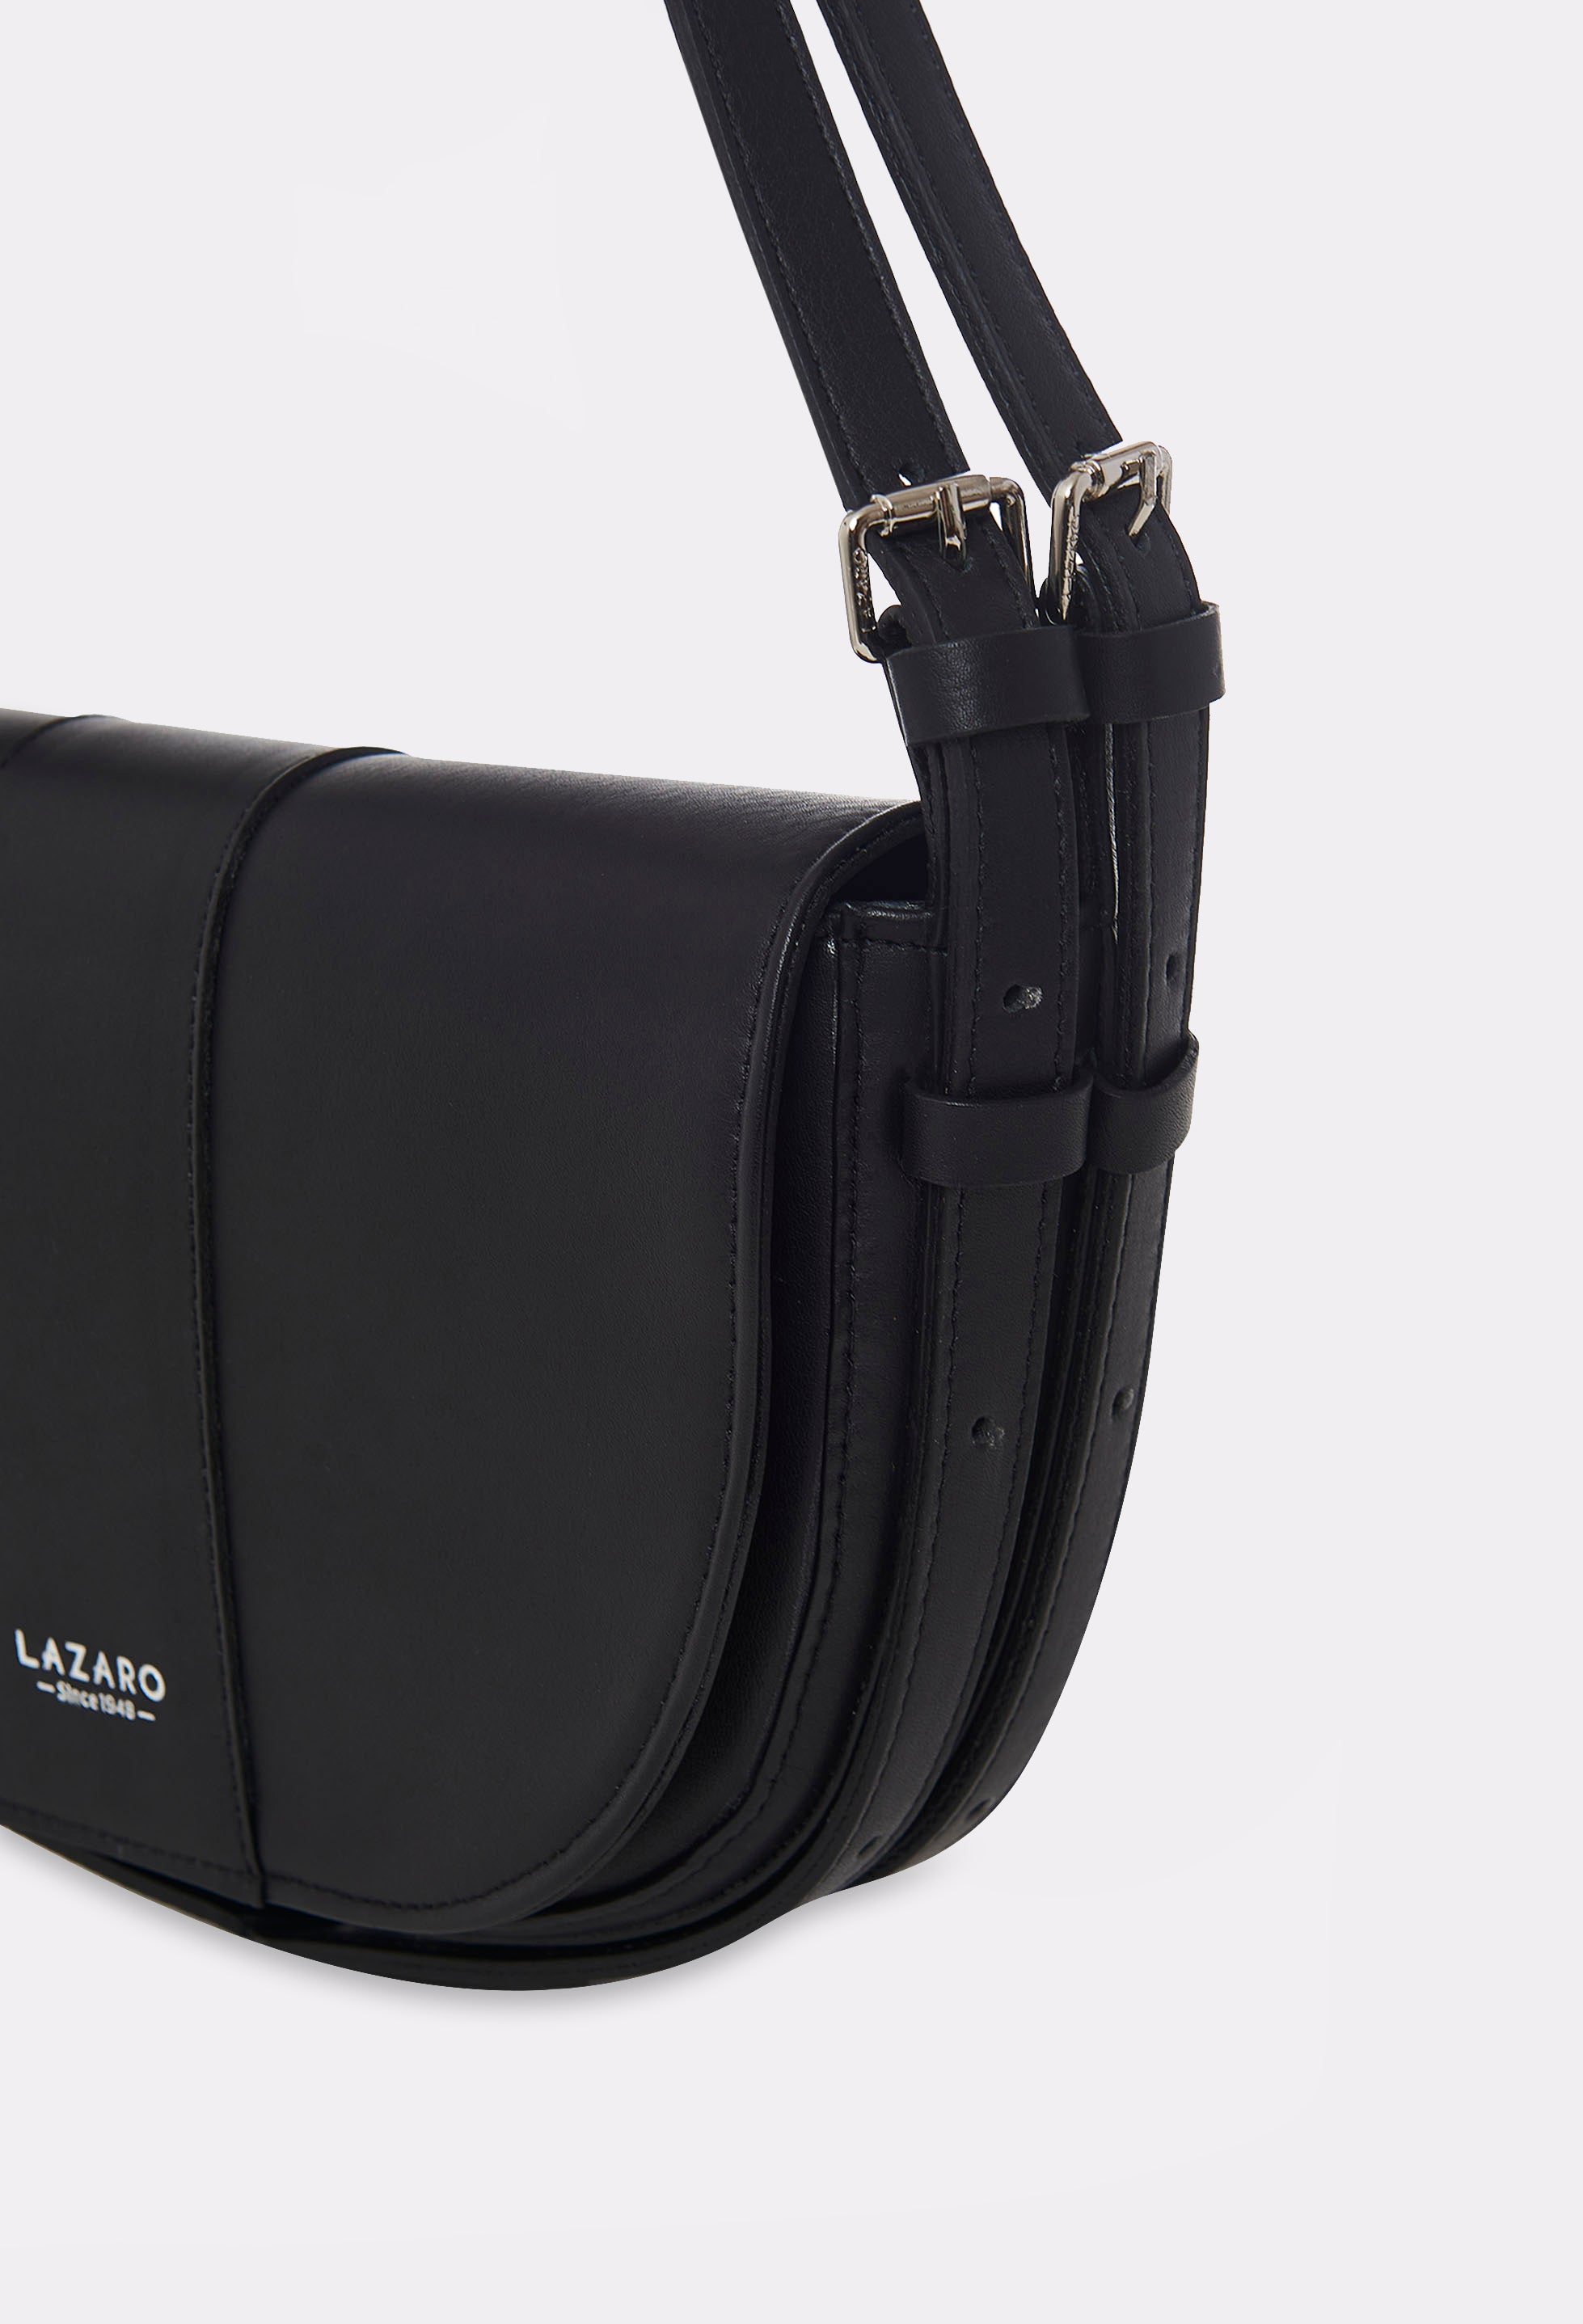 Partial photo of a Black Leather Shoulder Bag Montana with silver embossed Lazaro logo and double leather strap, equipped with metal buckles and cufflinks.